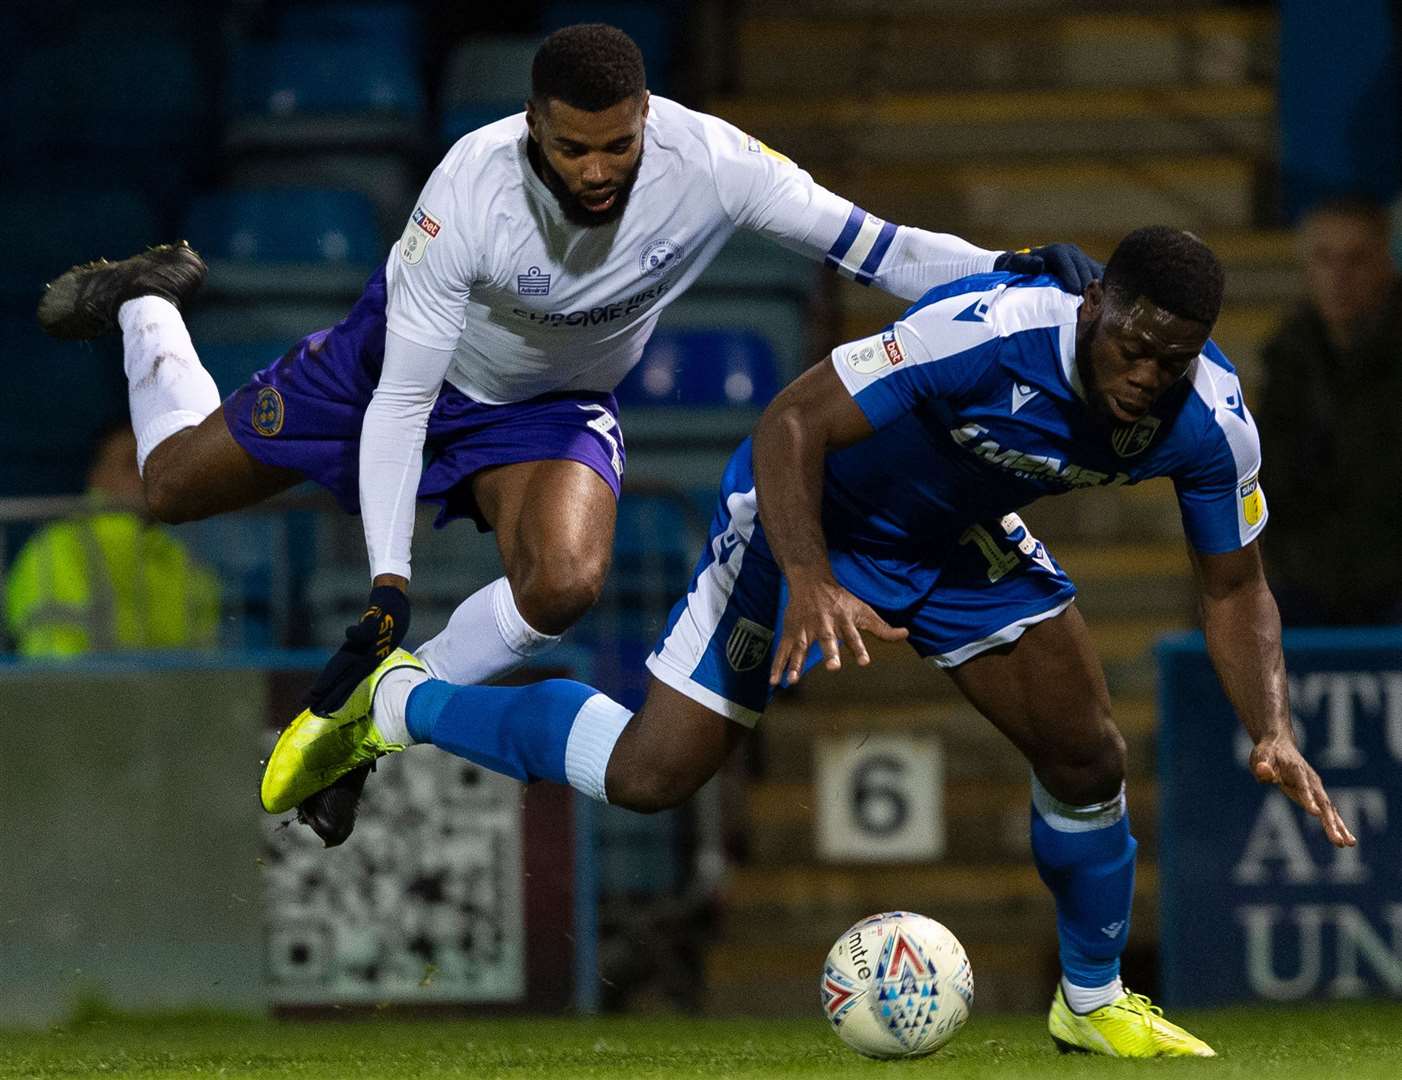 Gillingham's John Akinde wins a penalty on his home debut against Shrewsbury last week. Picture: Ady Kerry